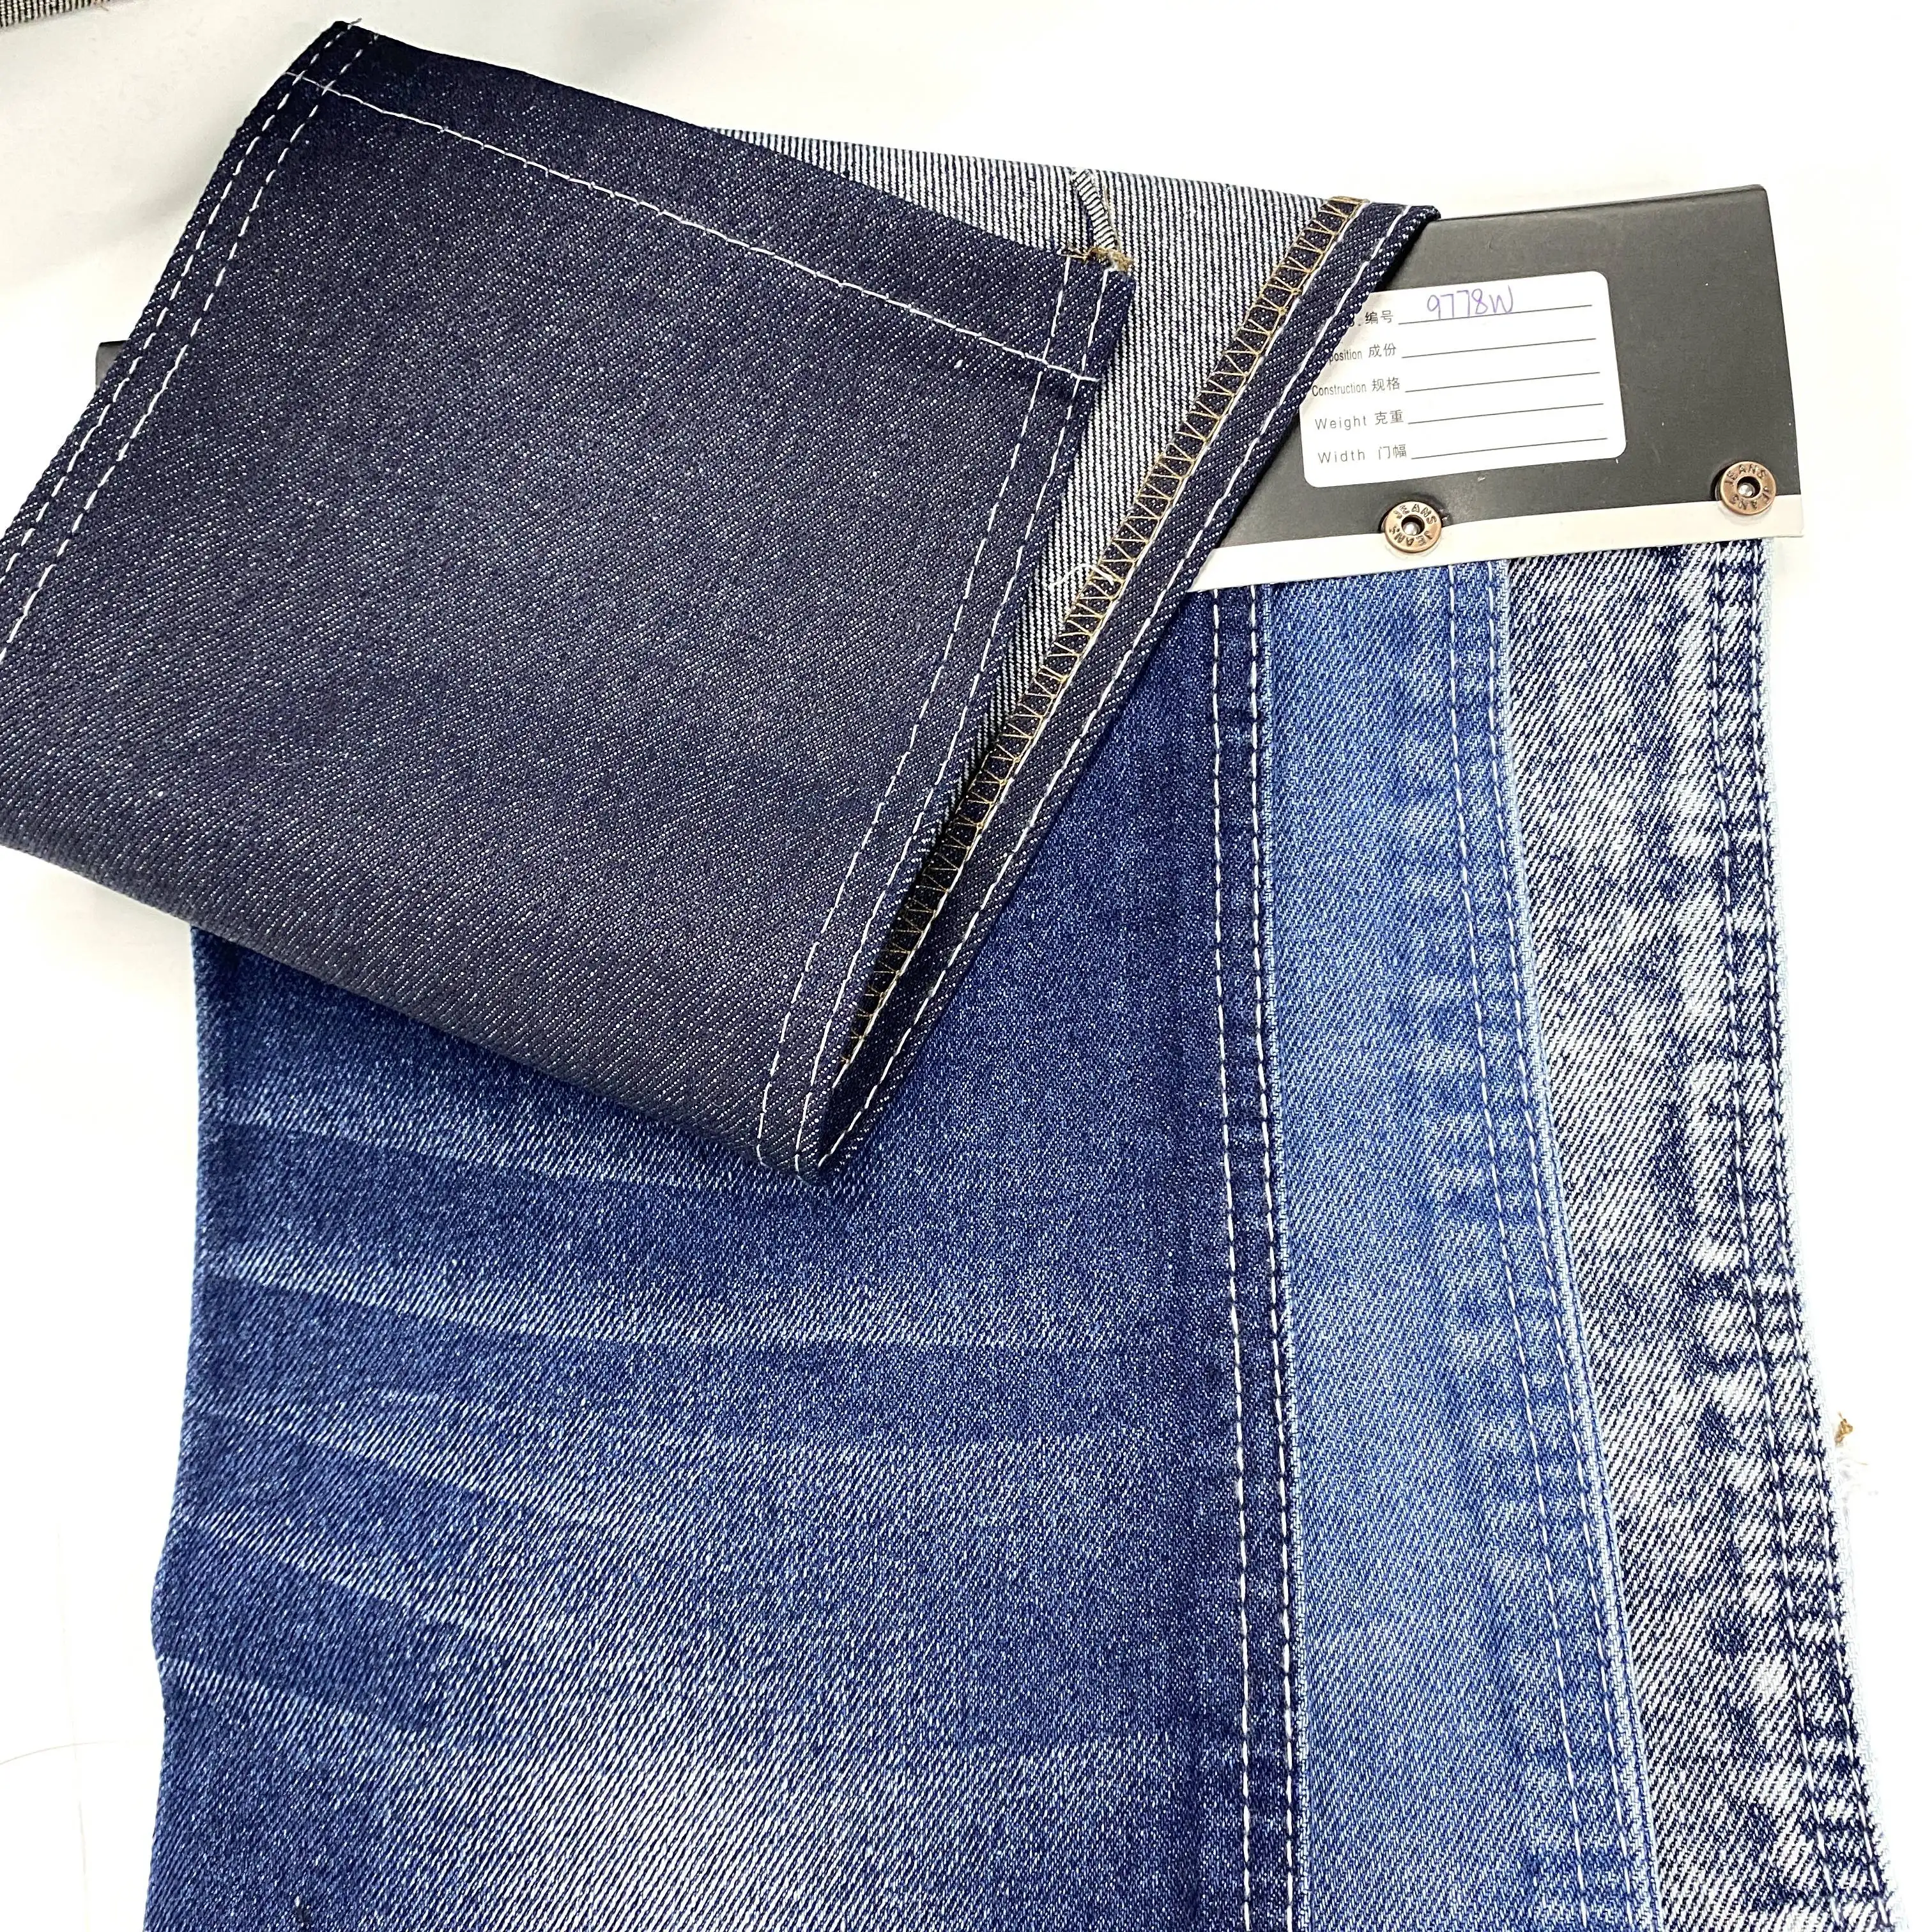 China Supplier Jeans Fabric With 13.5oz Denim Fabric Export For Major Brand Oe Jean Fabric Manufacturer